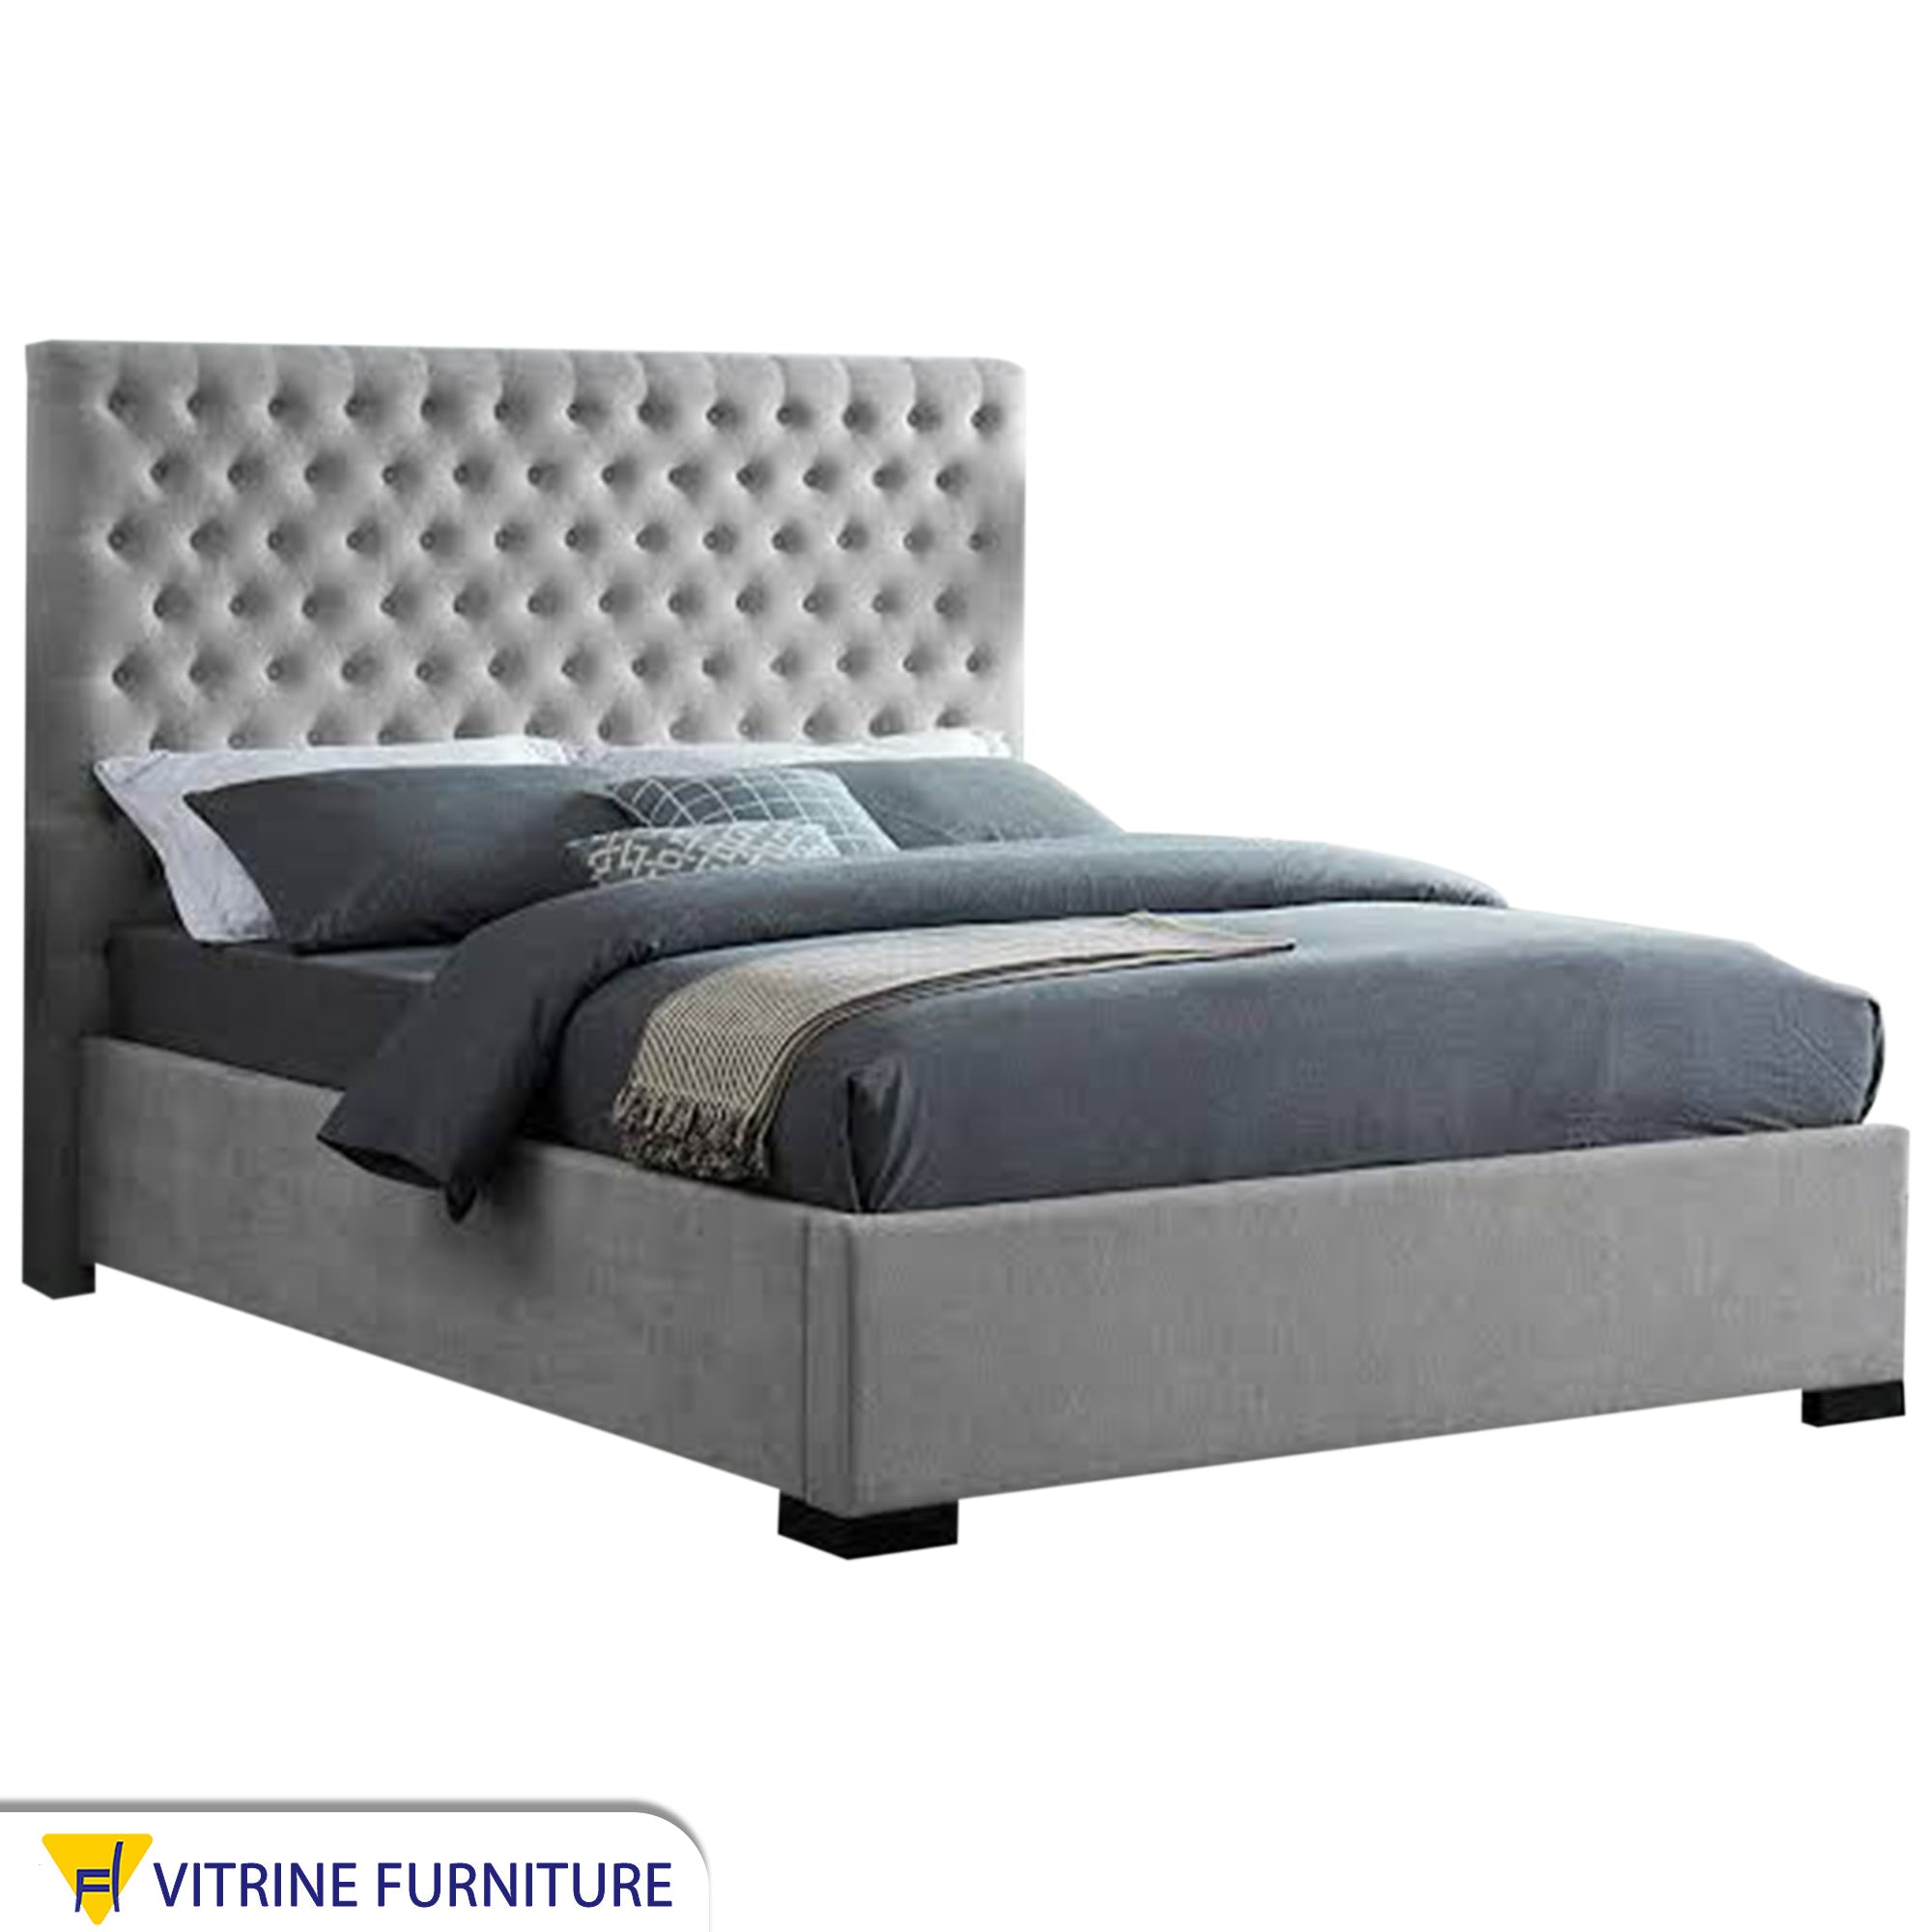 Light gray bed with Cabotain upholstery